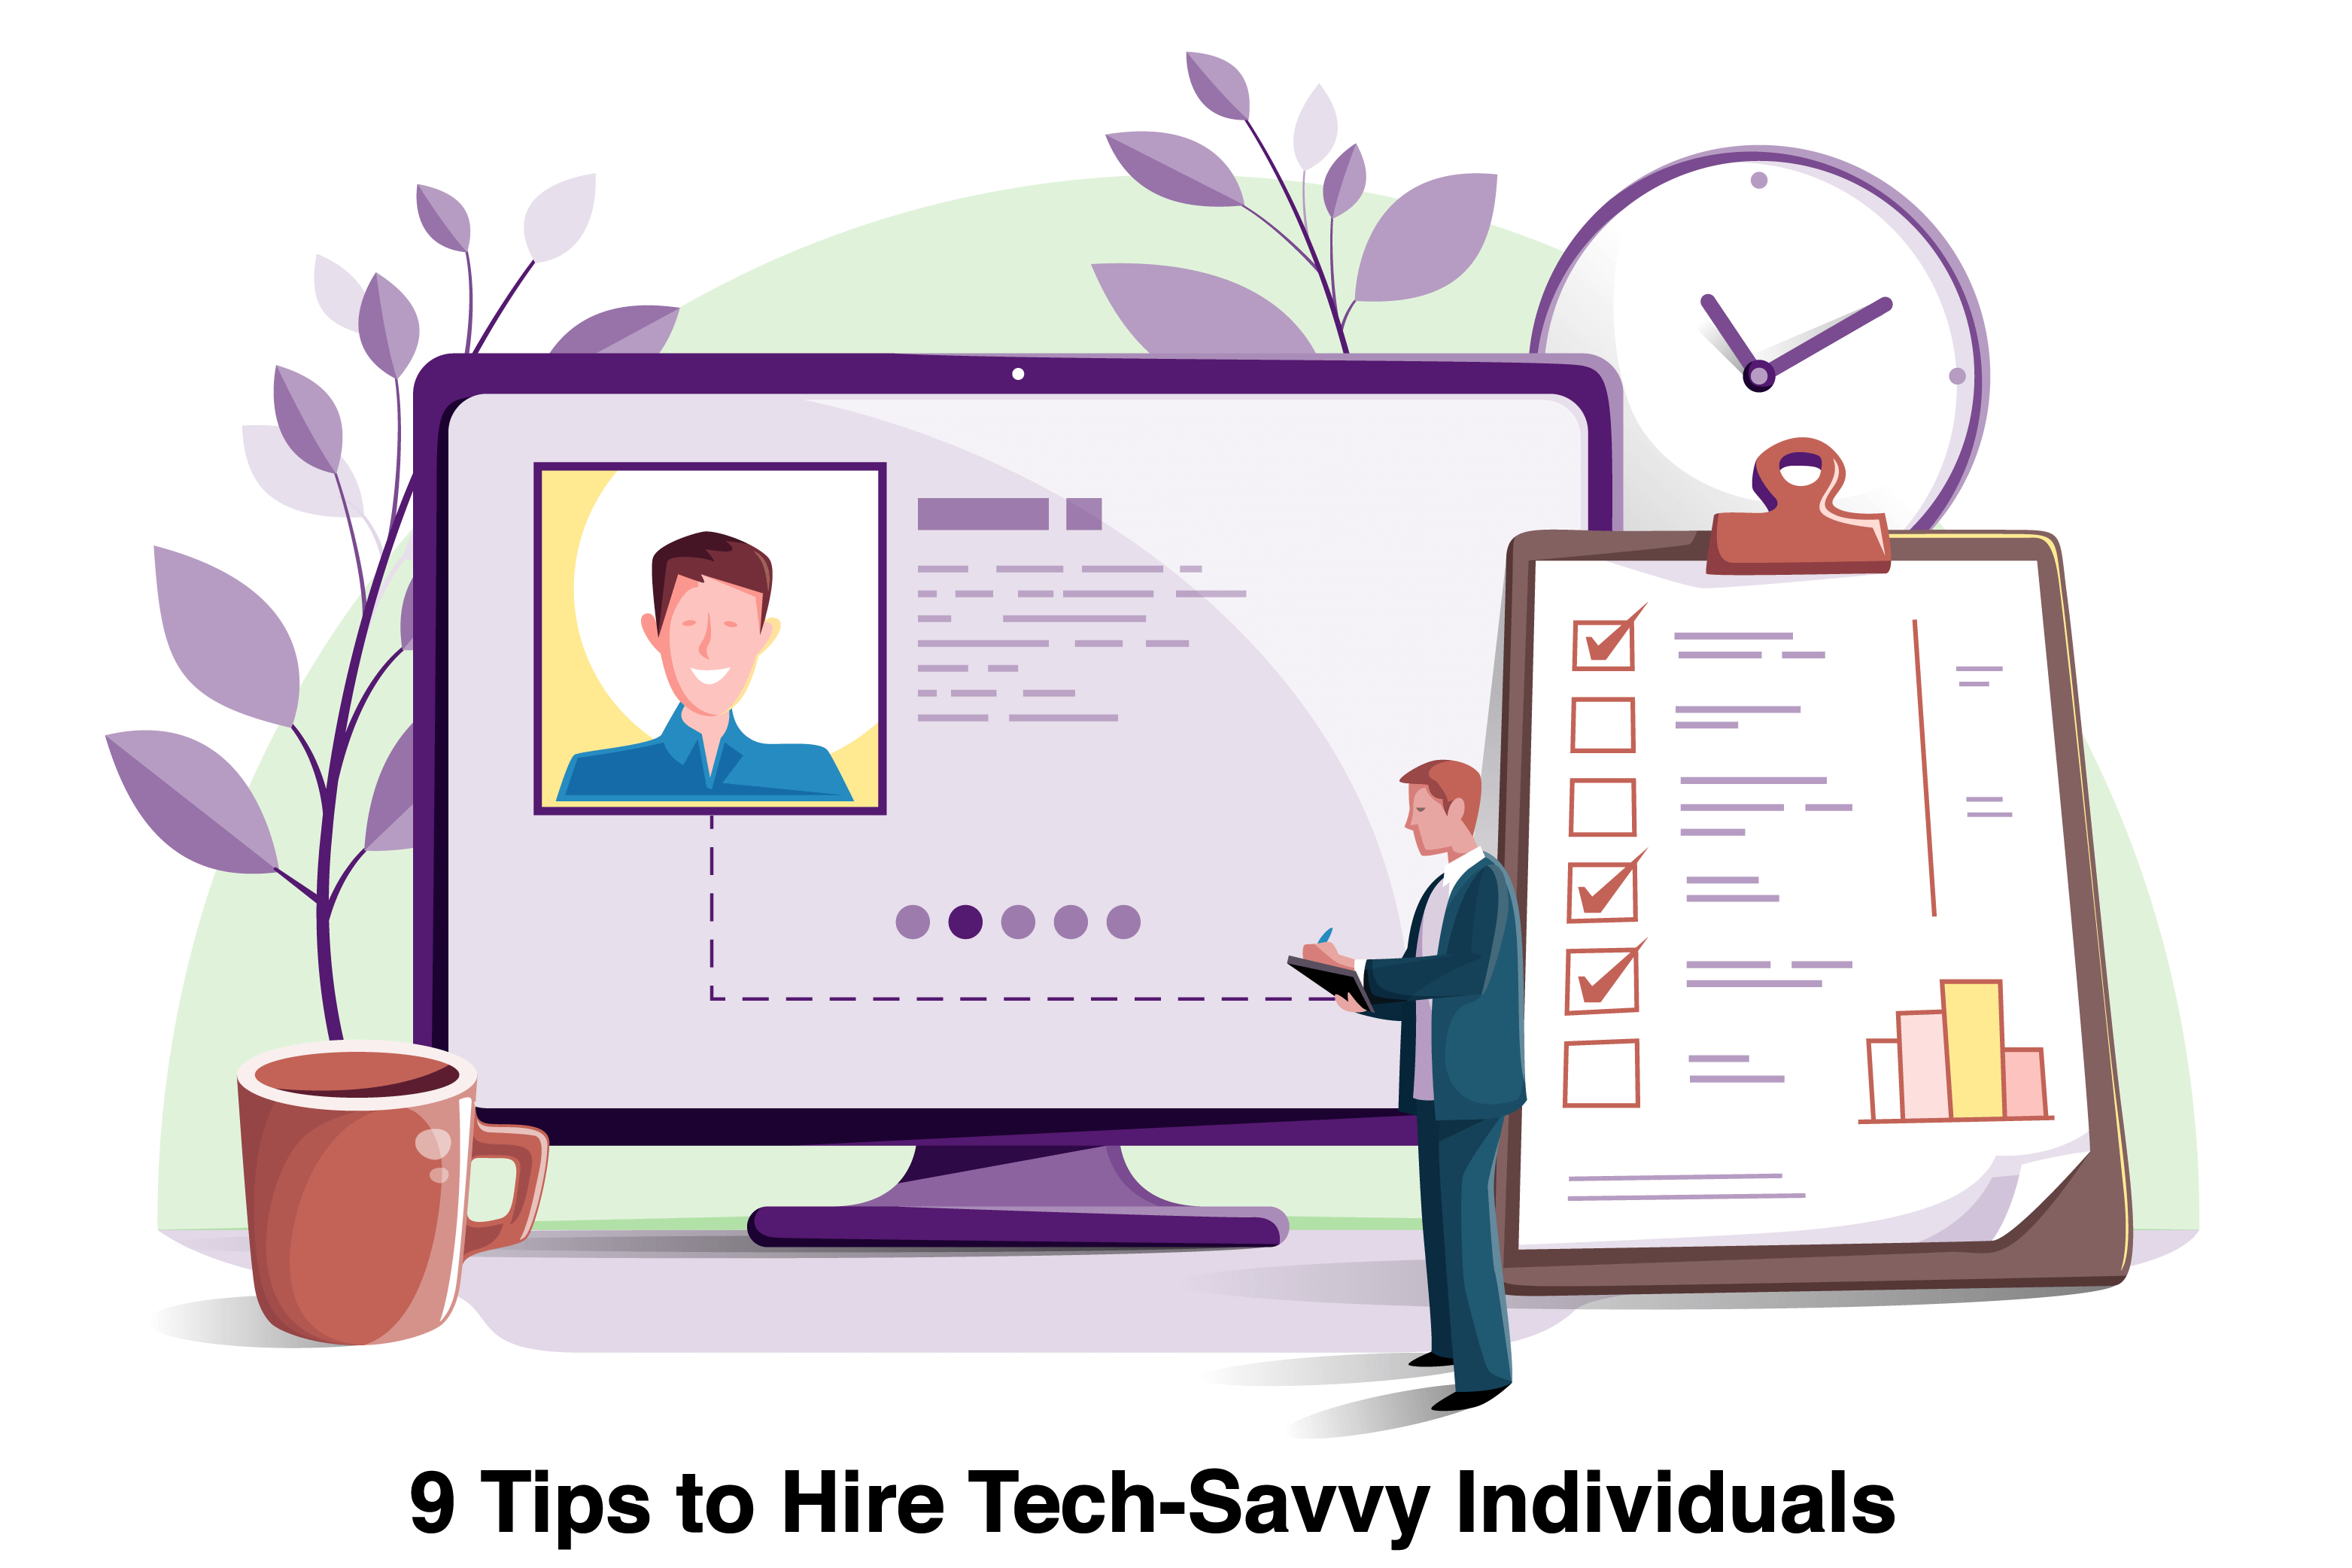 9 Tips to Hire Tech-Savvy Individuals